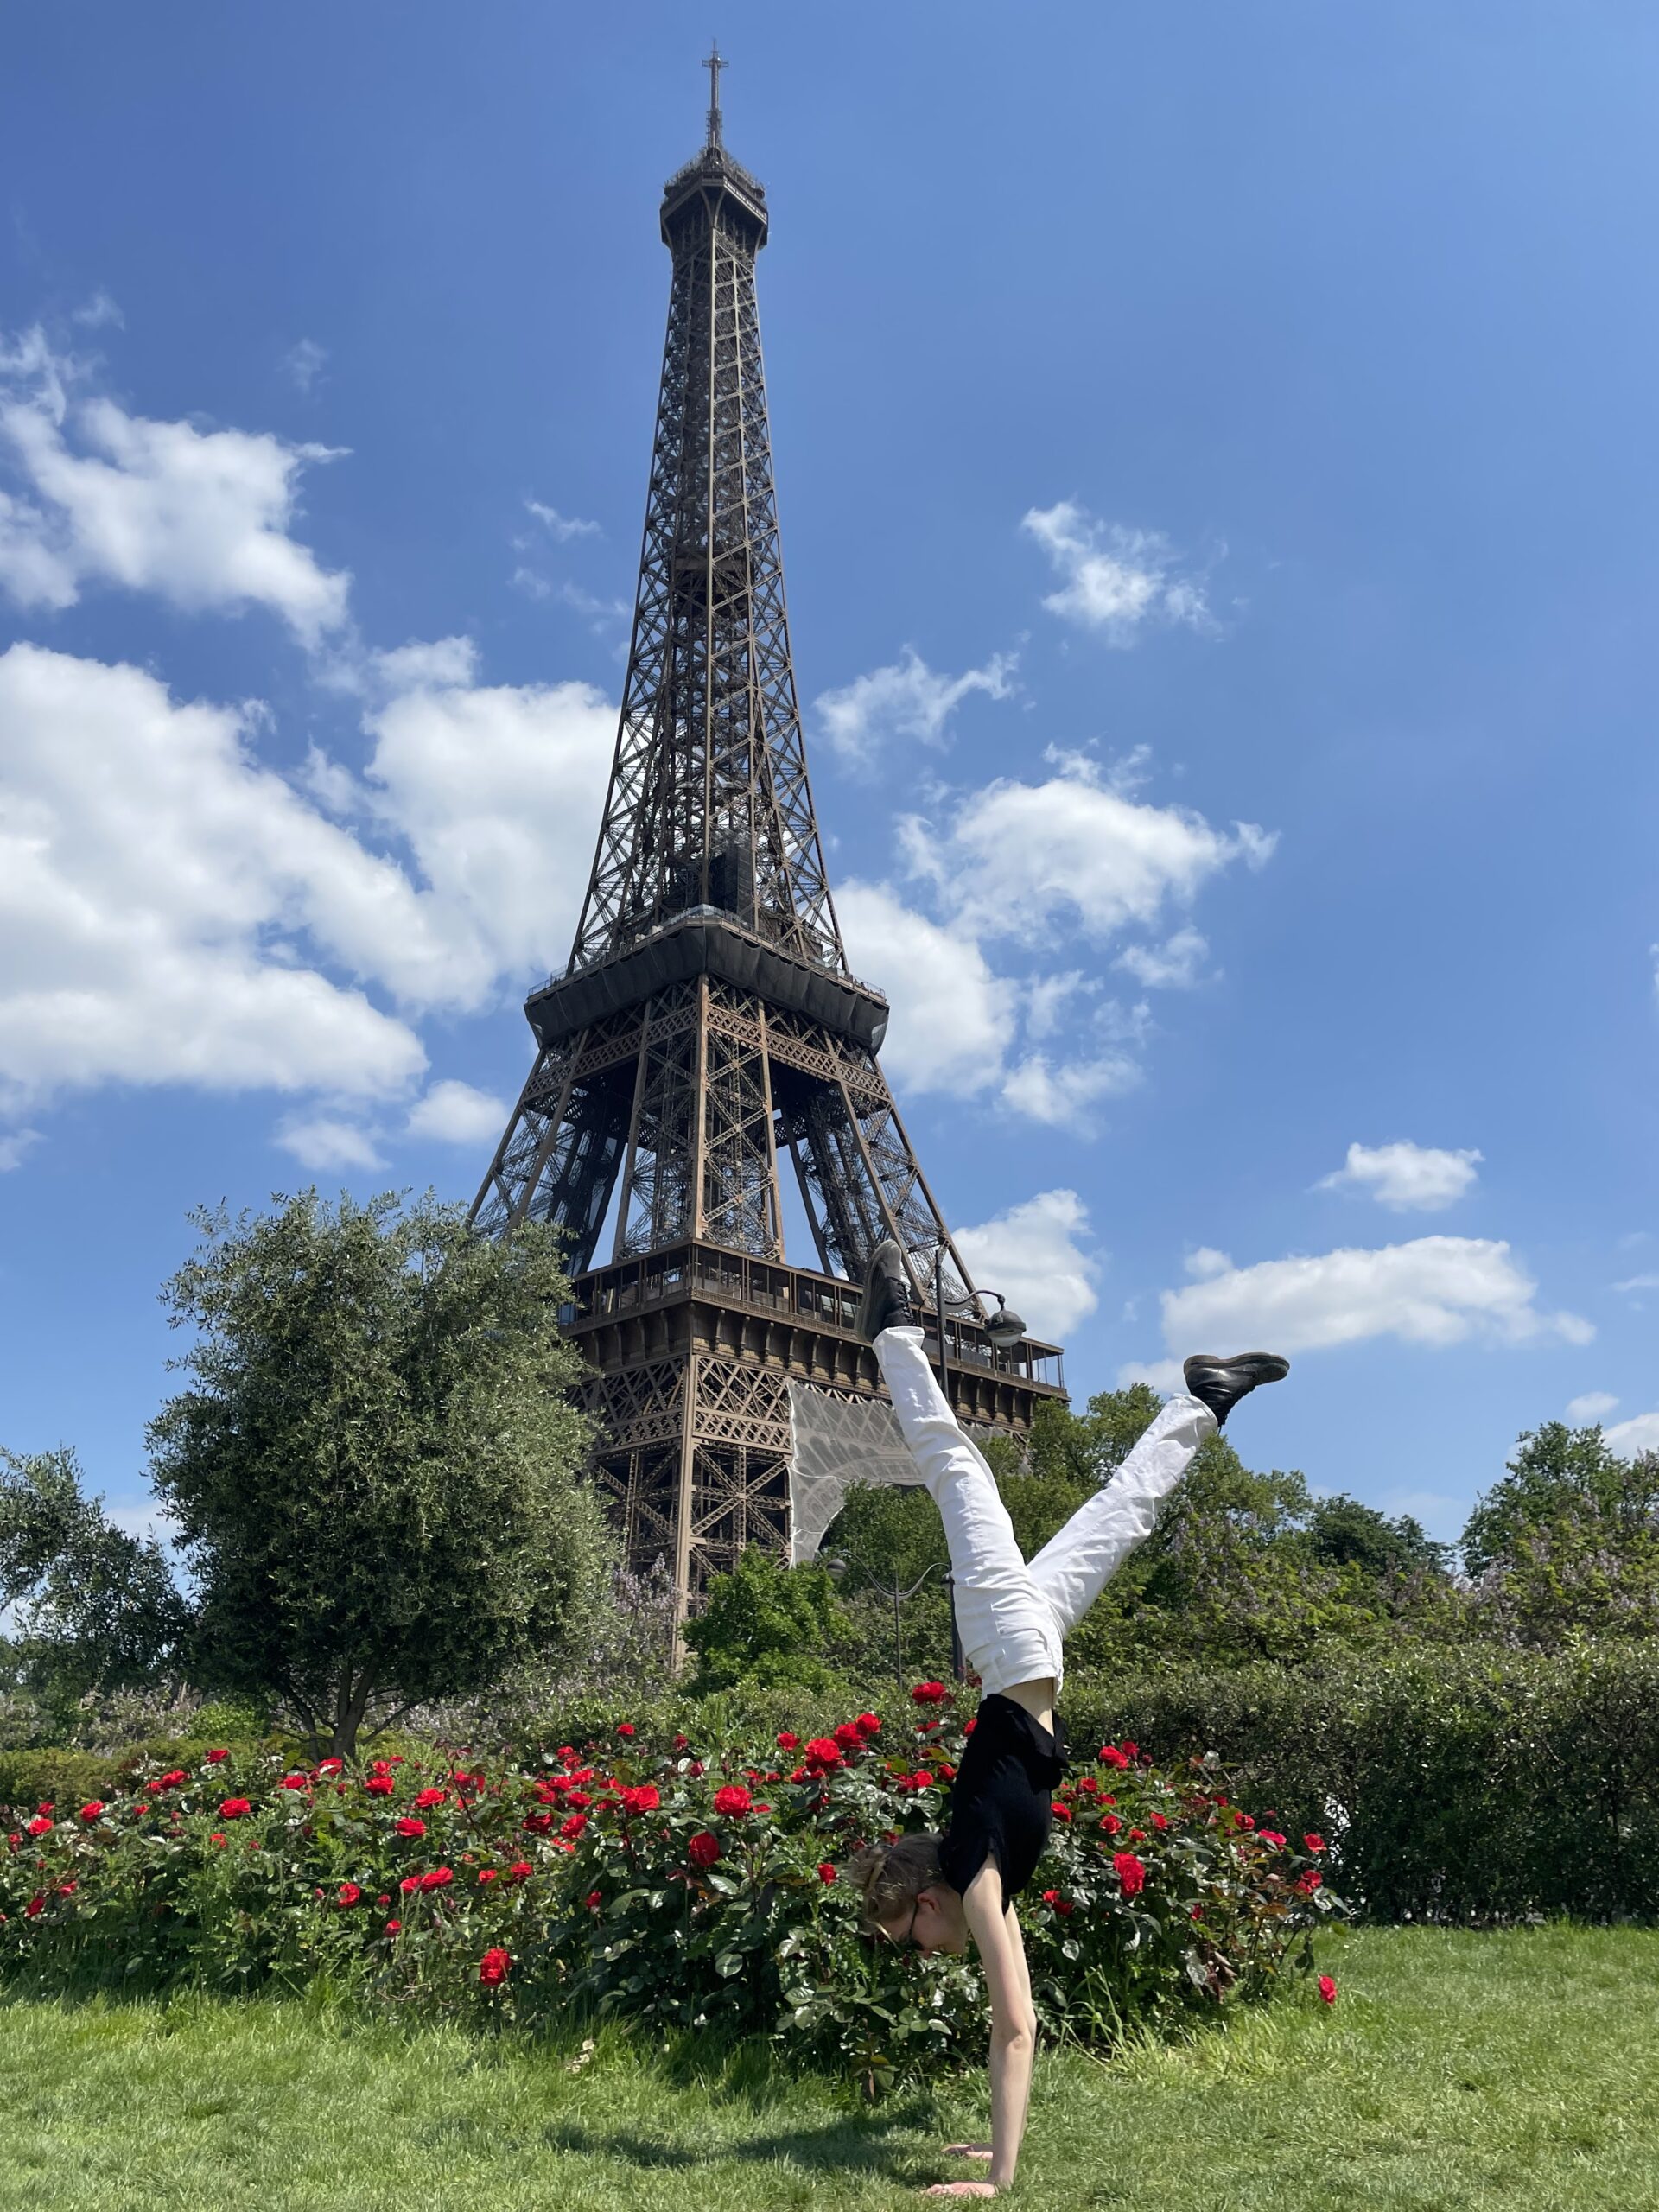 NYU homestay student Devyn doing a handstand in front of the Eiffel Tower.